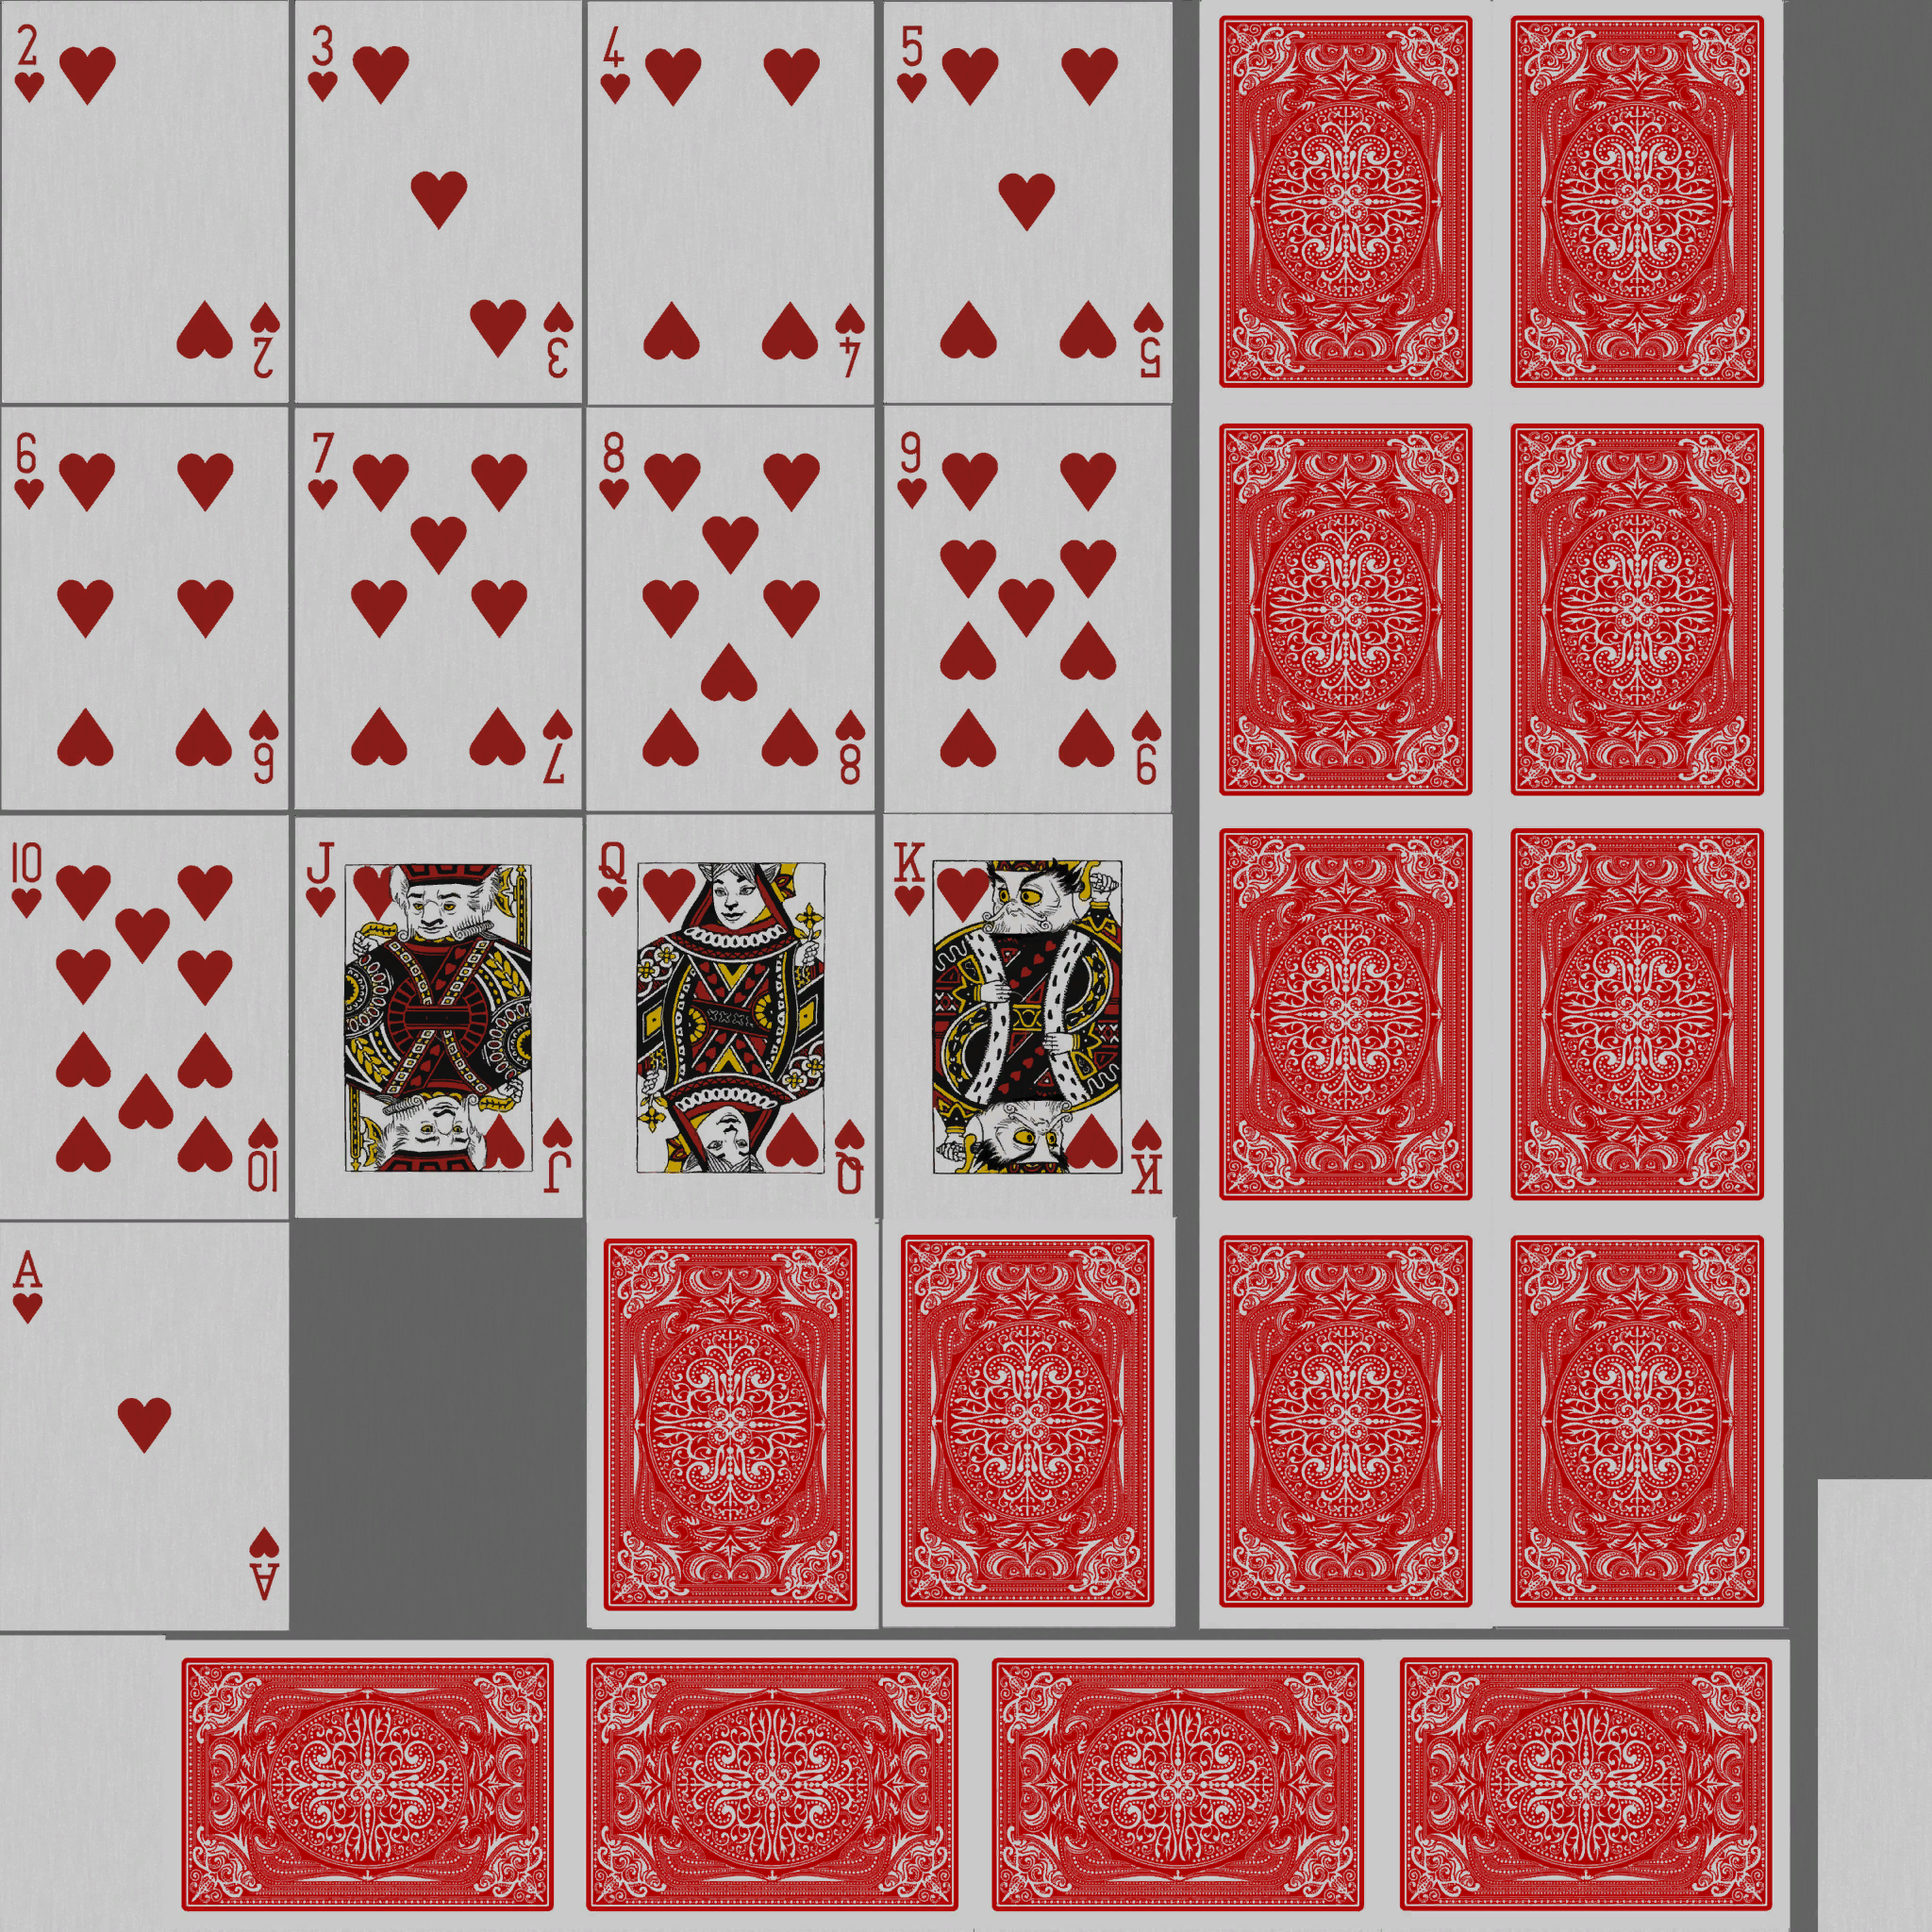 Playing Cards (Hearts)